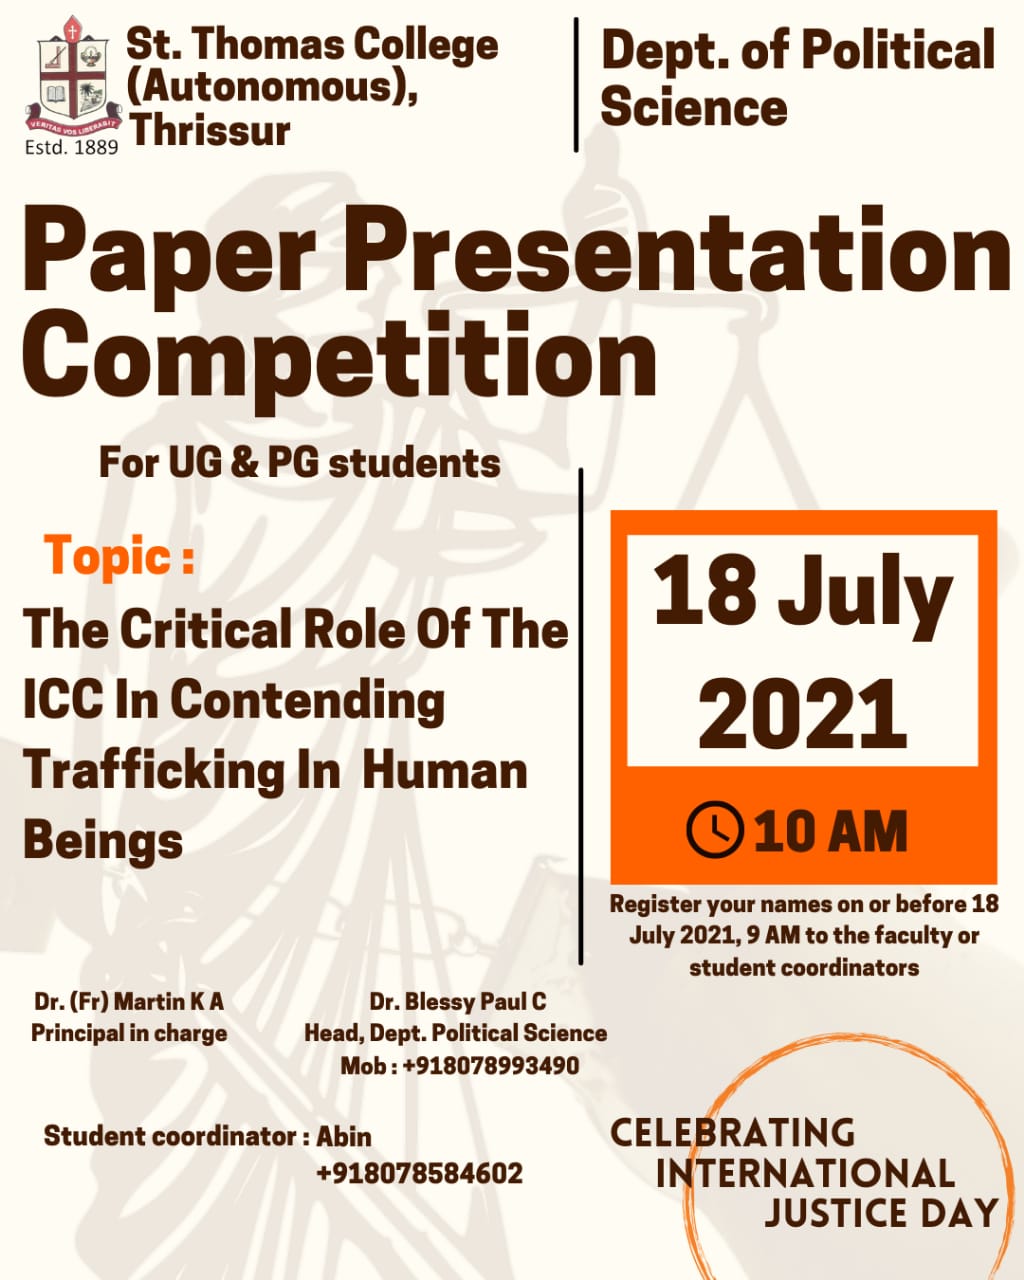 topics in paper presentation competition